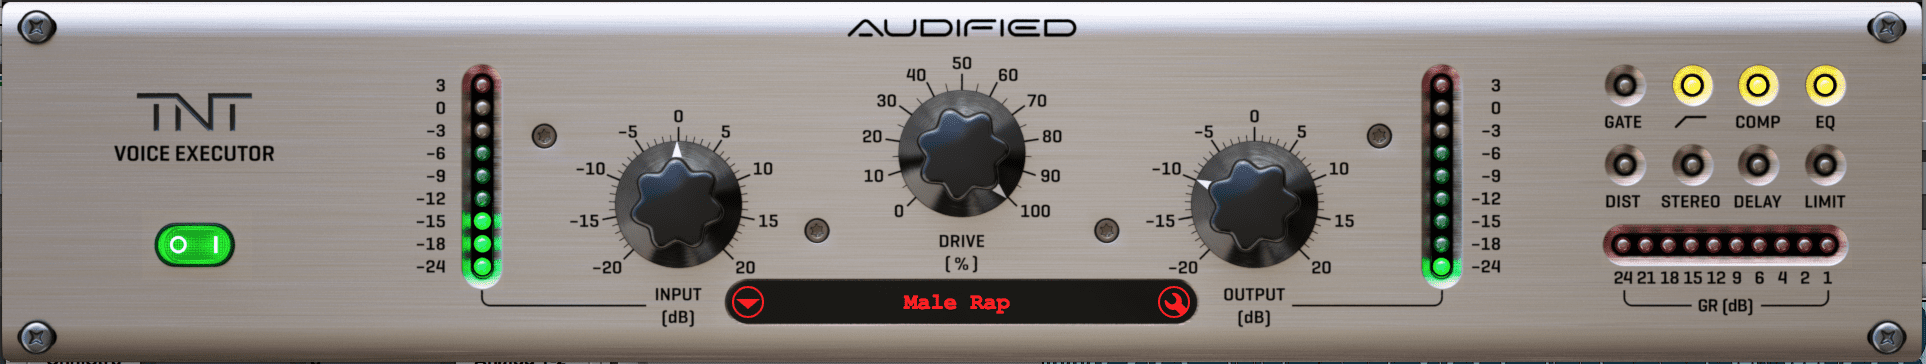 Audified TNT Voice Executor